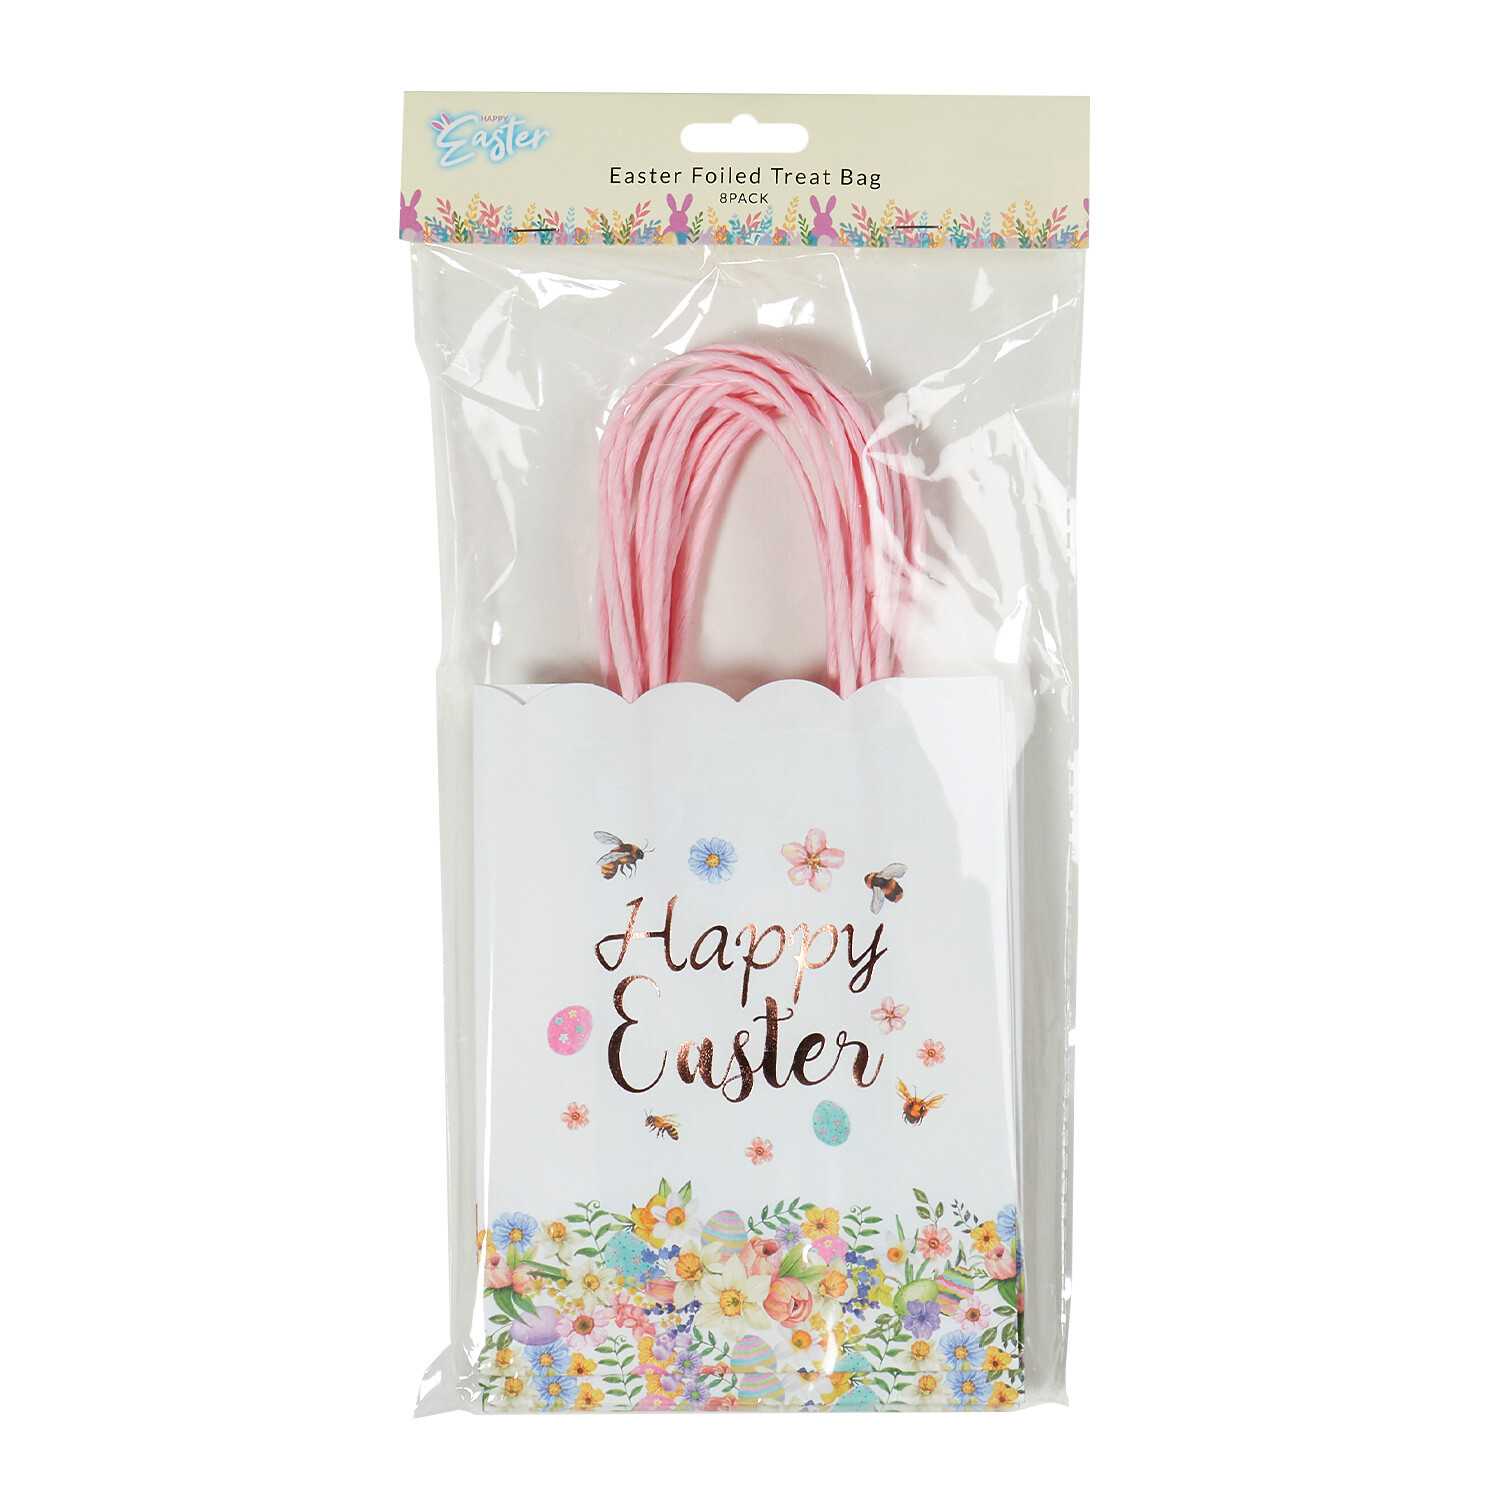 Easter Foiled Treat Bags - White Image 1